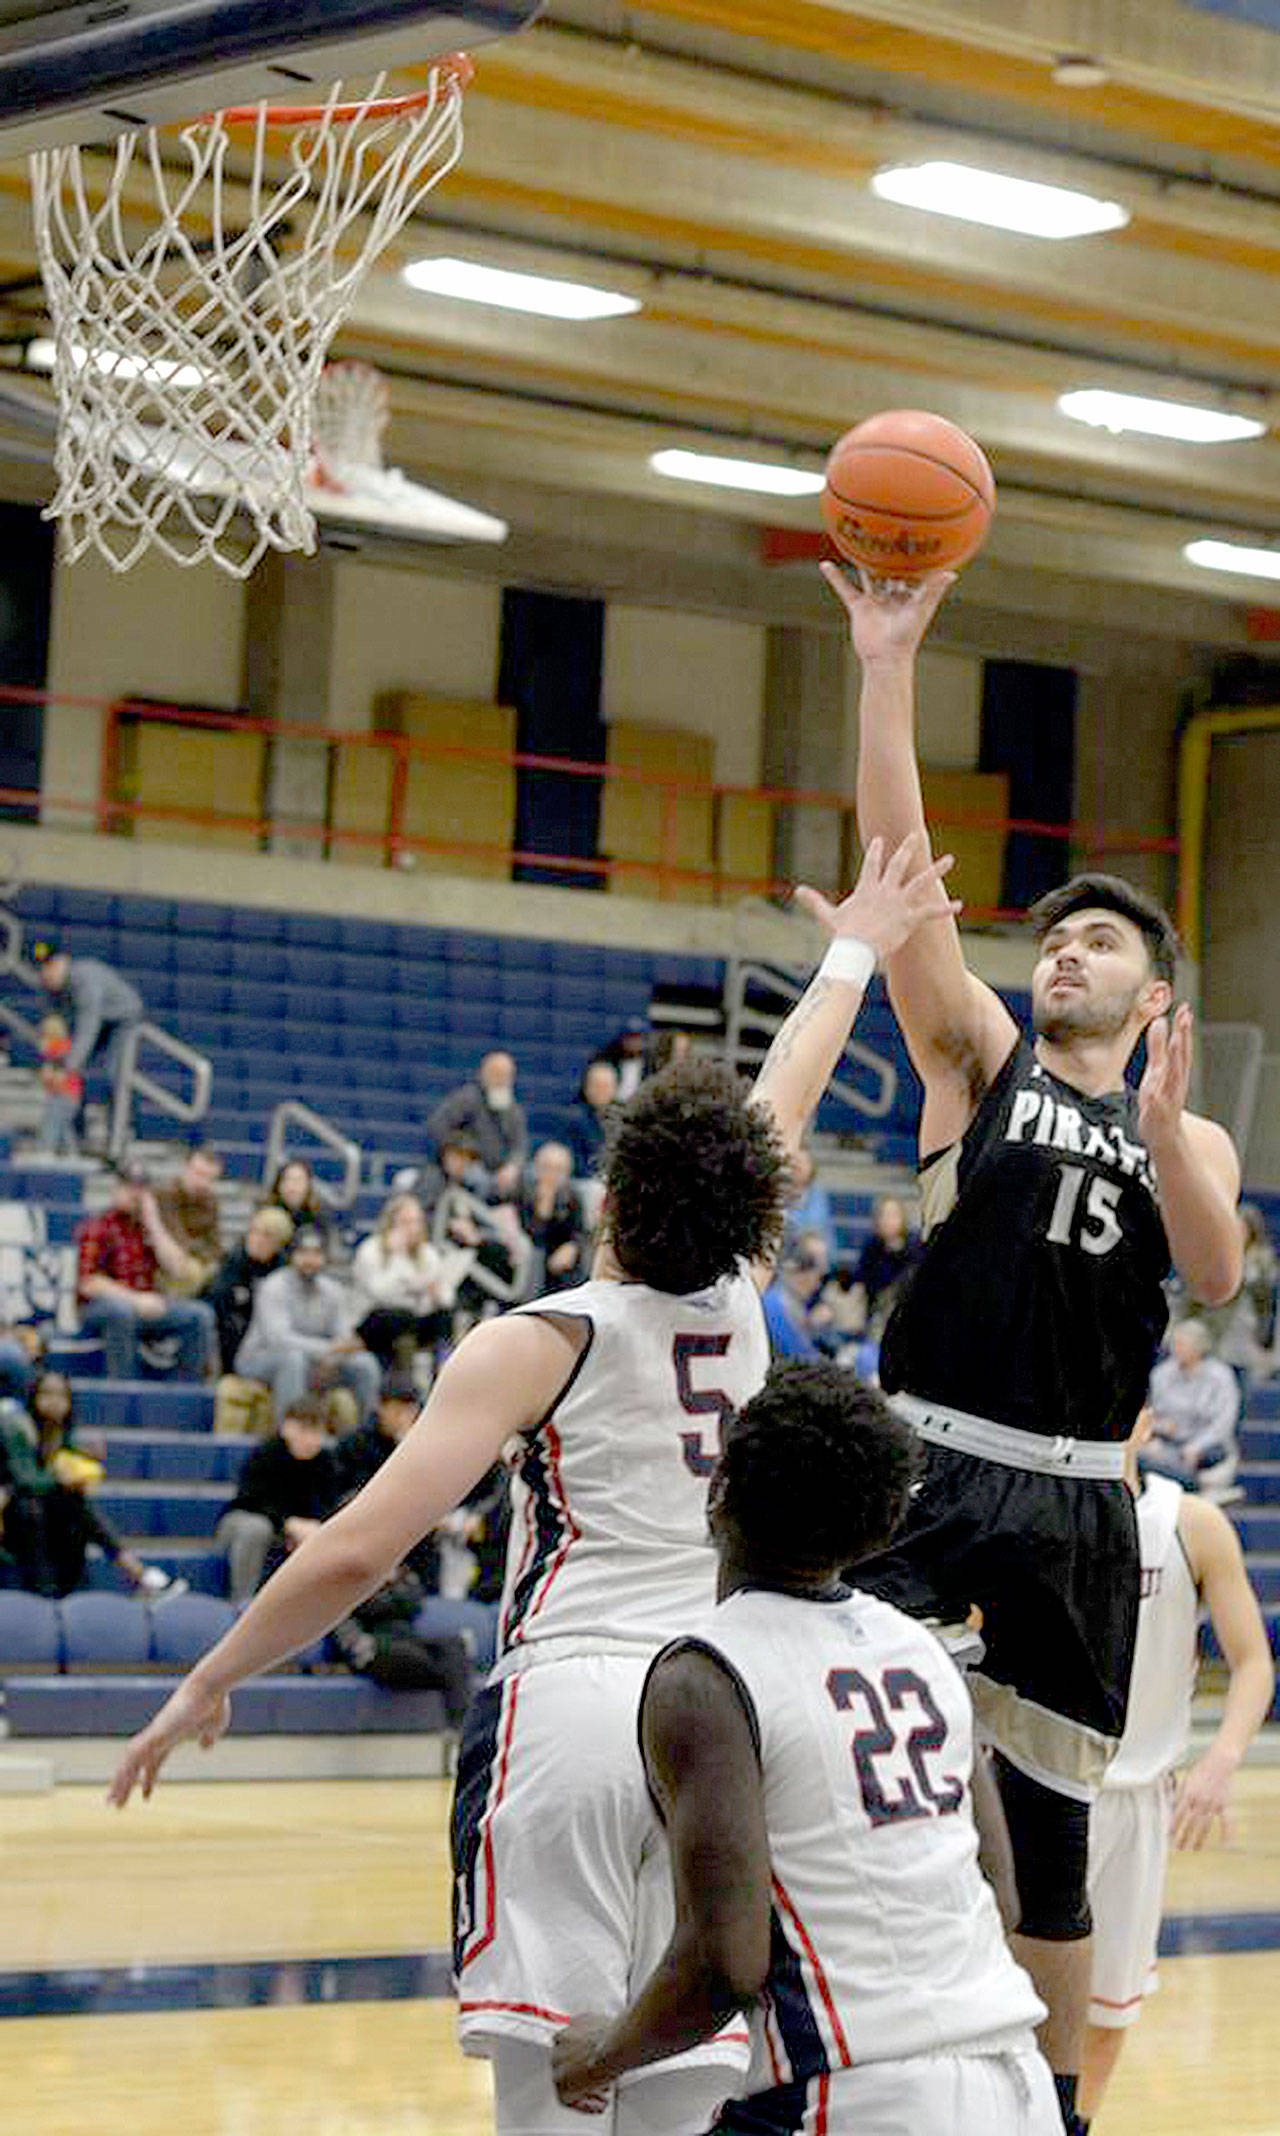 Rick Ross Samuel Kahapea shoots against Bellevue College. Kahapea scored 18 points to help the Pirates come from behind to beat Bellevue 69-68, qualifying for the NWAC Tournament.